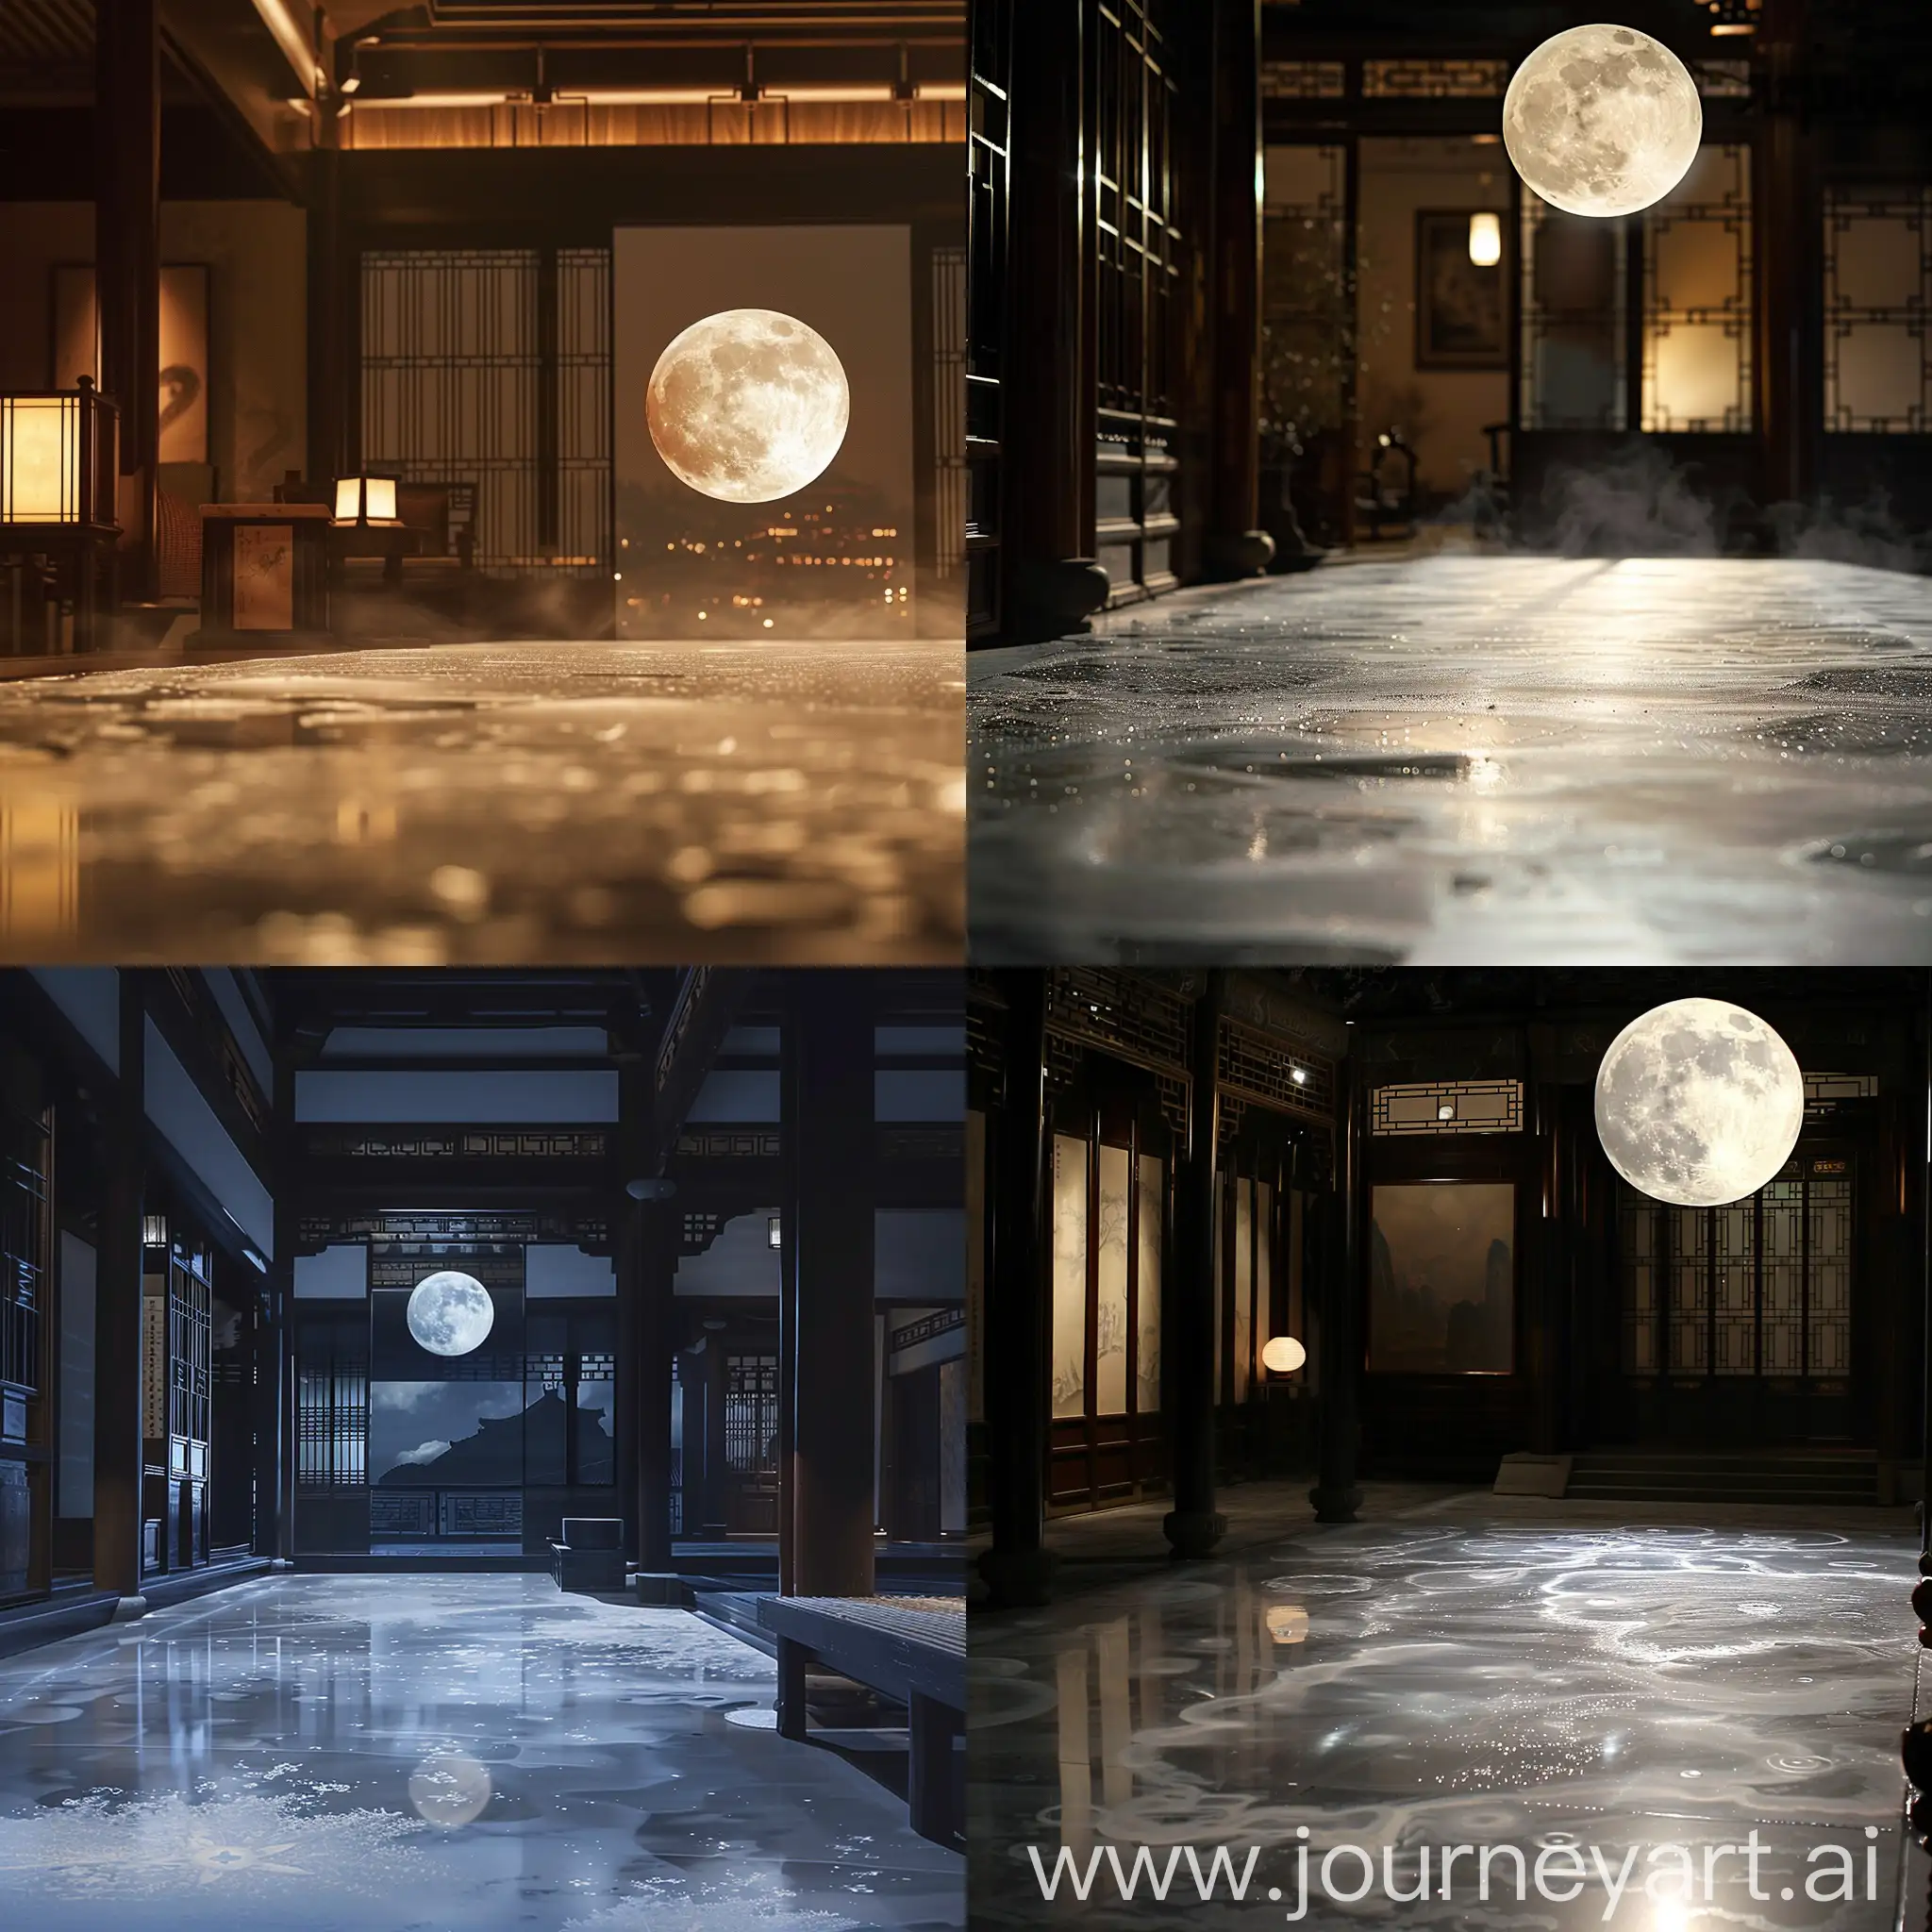 Solitude-in-Moonlight-Poetic-Reflections-in-Traditional-Chinese-Setting